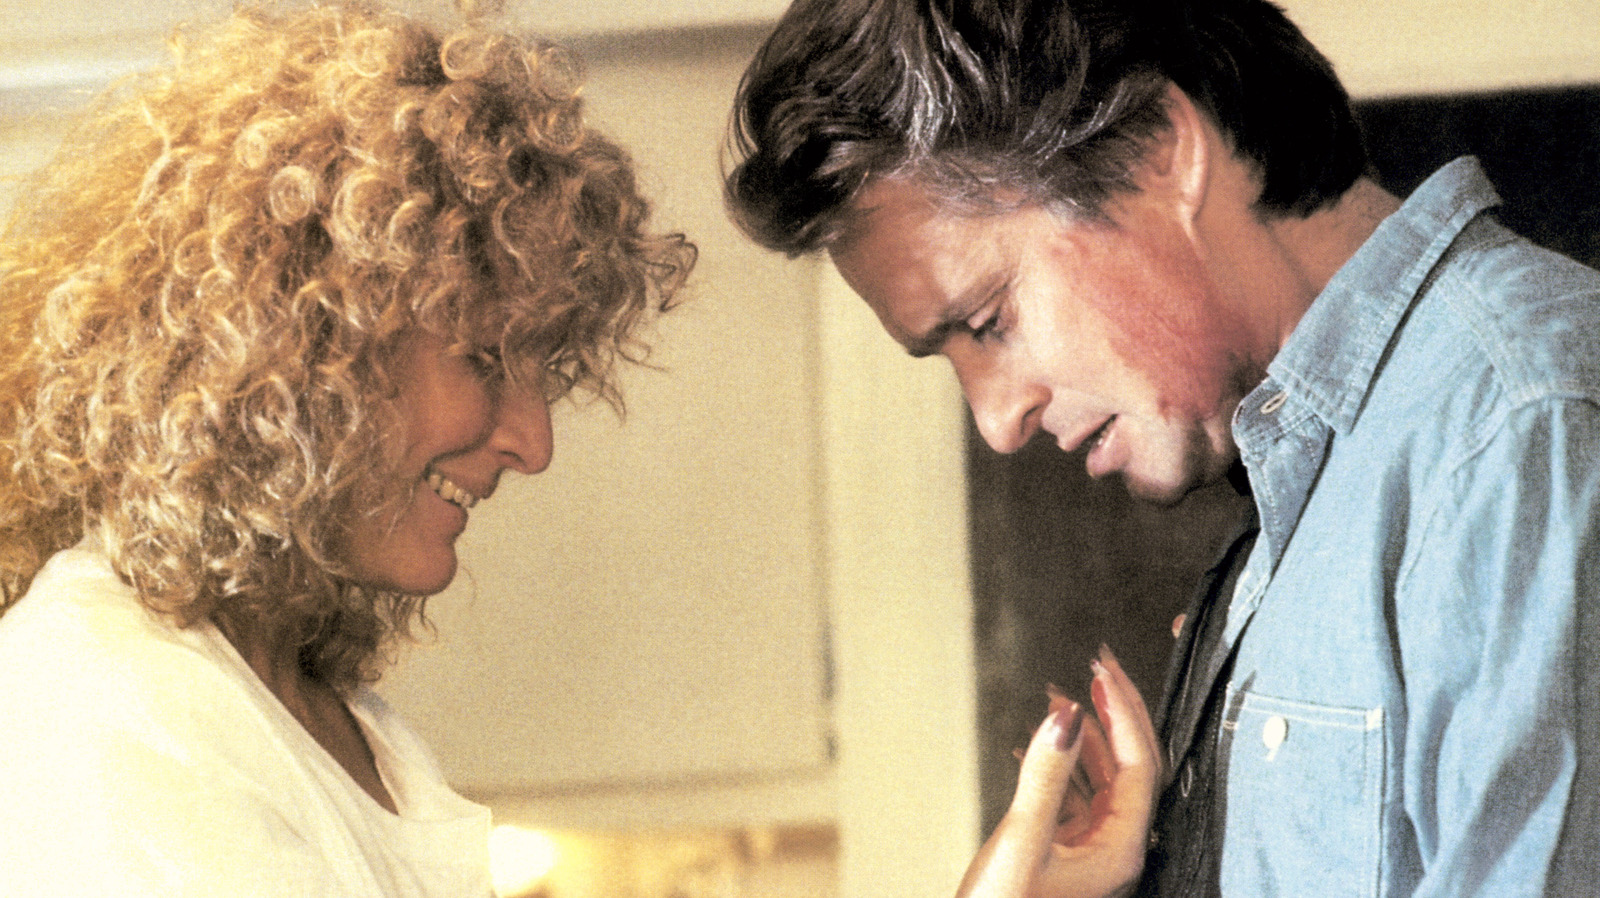 #The Flight Attendant Director Silver Tree Will Helm Fatal Attraction Series